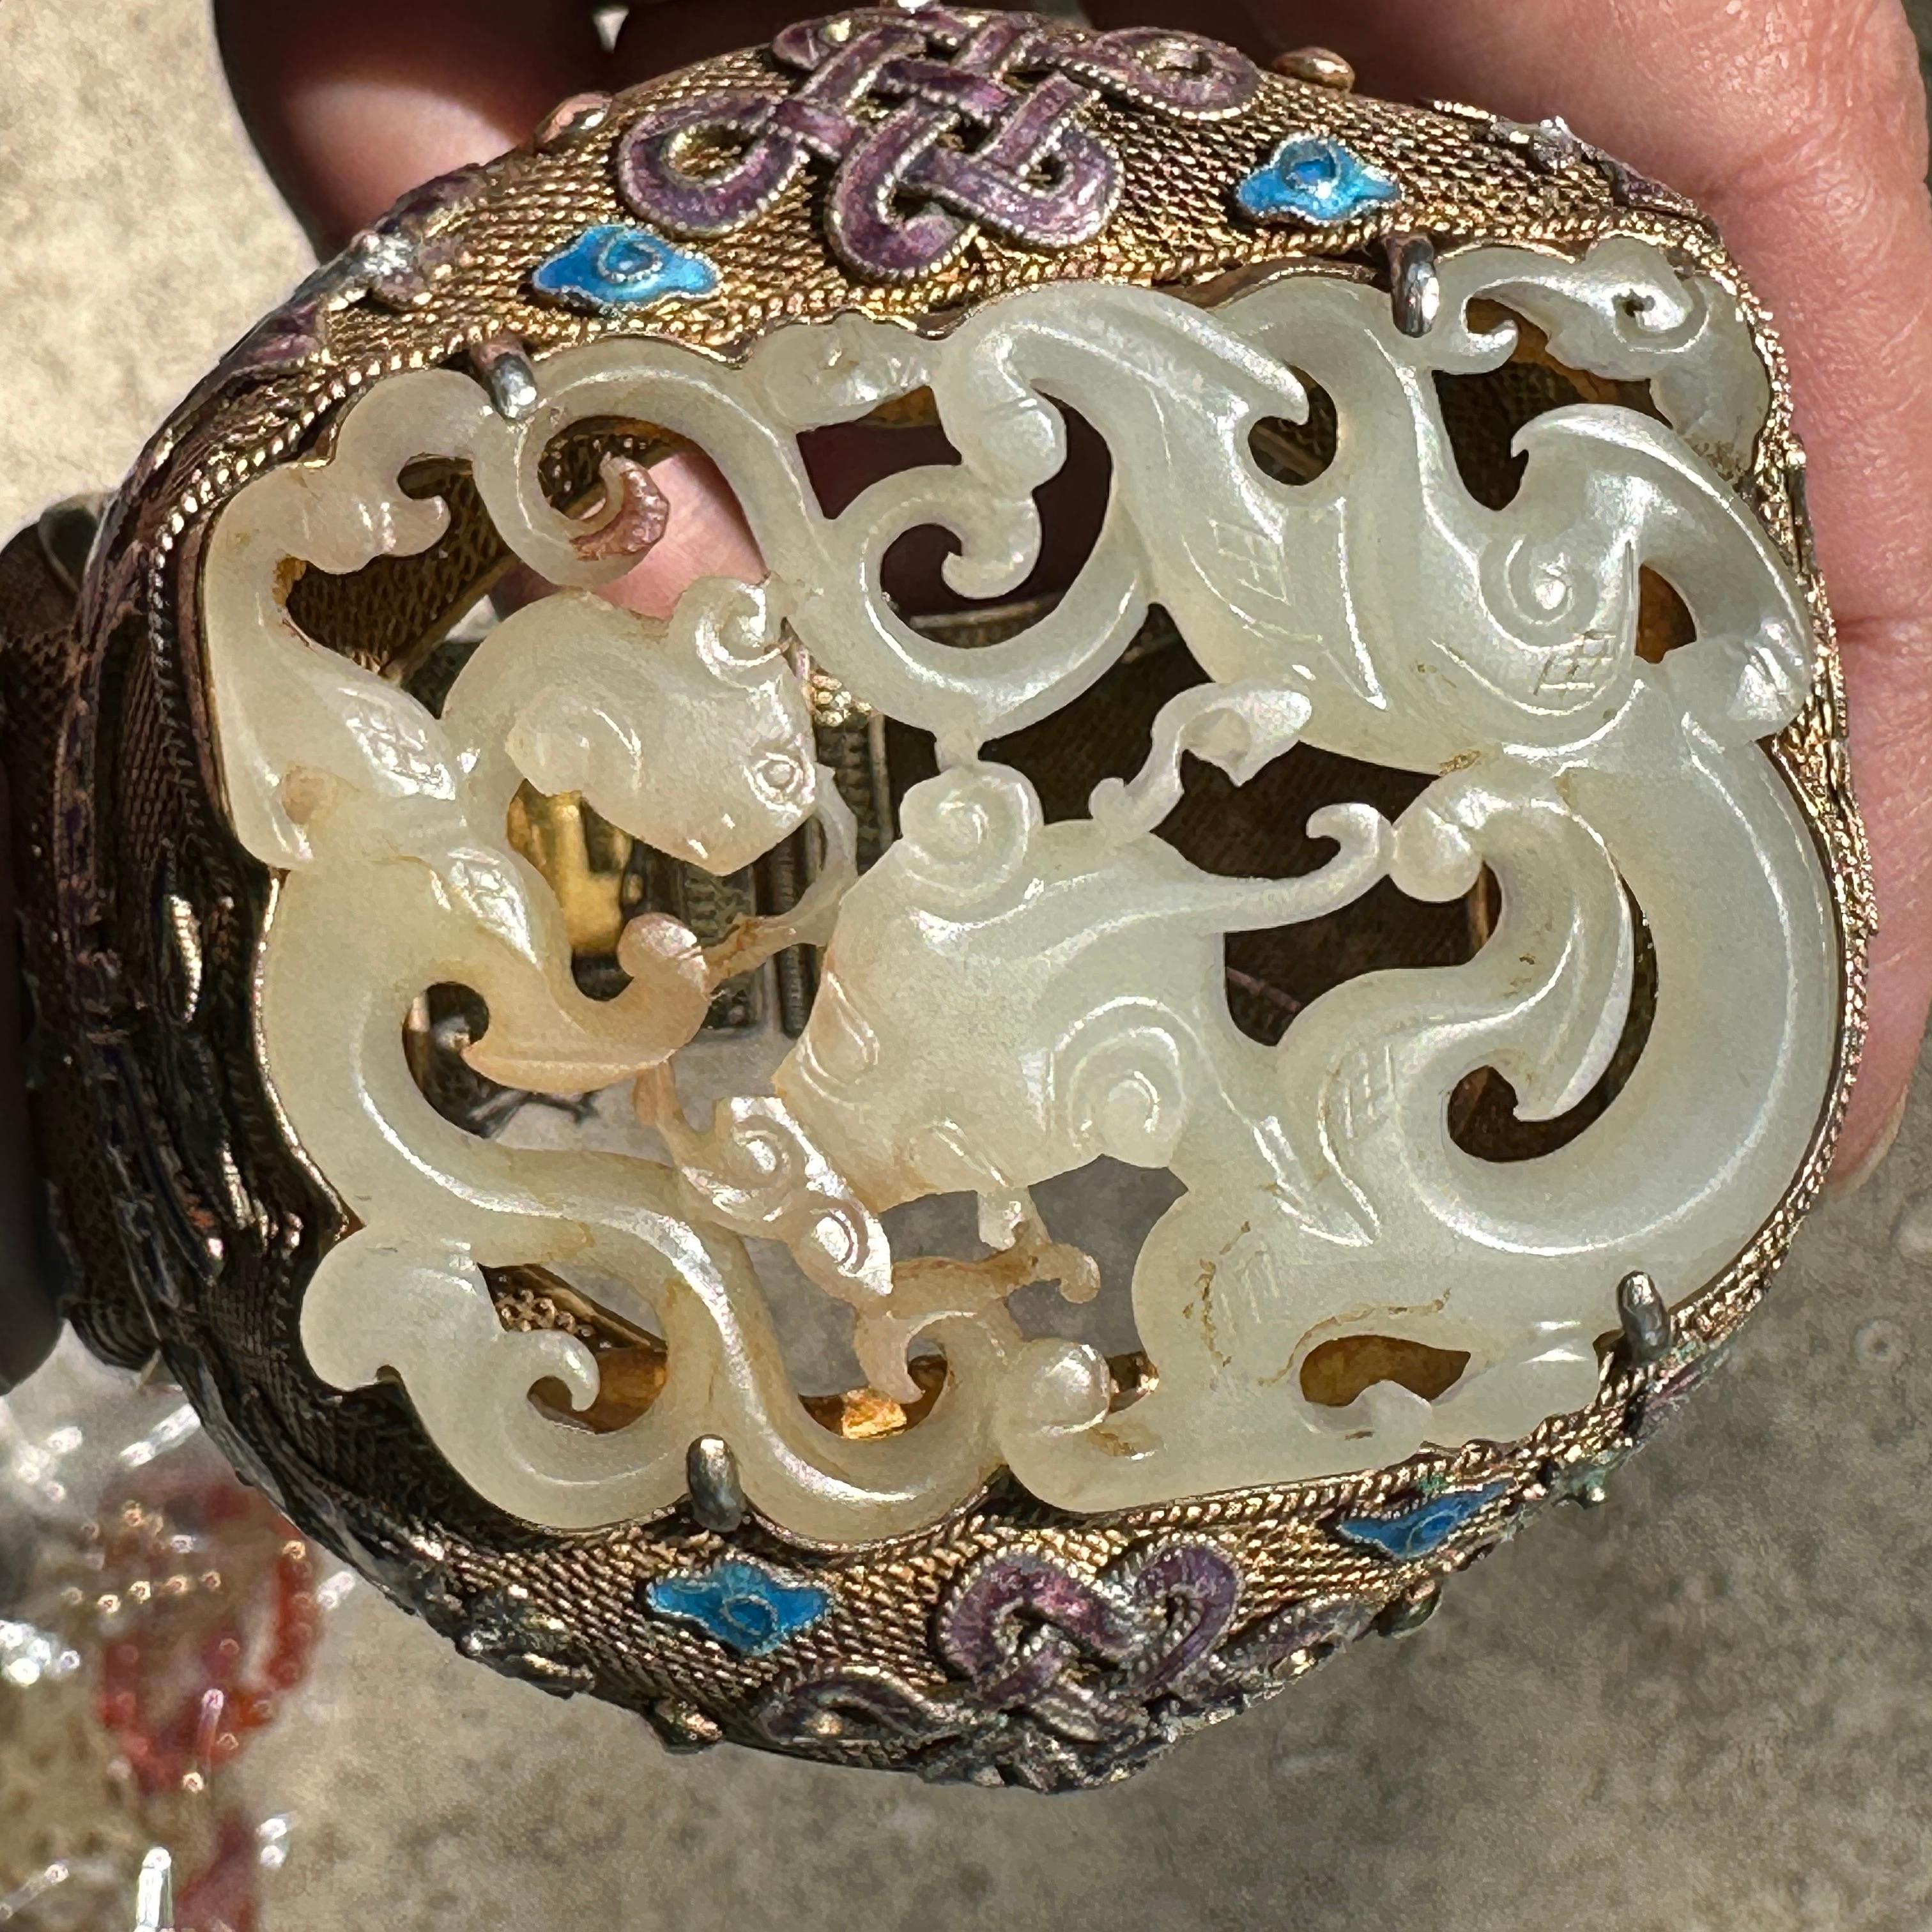 Chinese Export Silver Vermeil and Enamel Carved Jade Medallion Hinged Cuff Bracelet